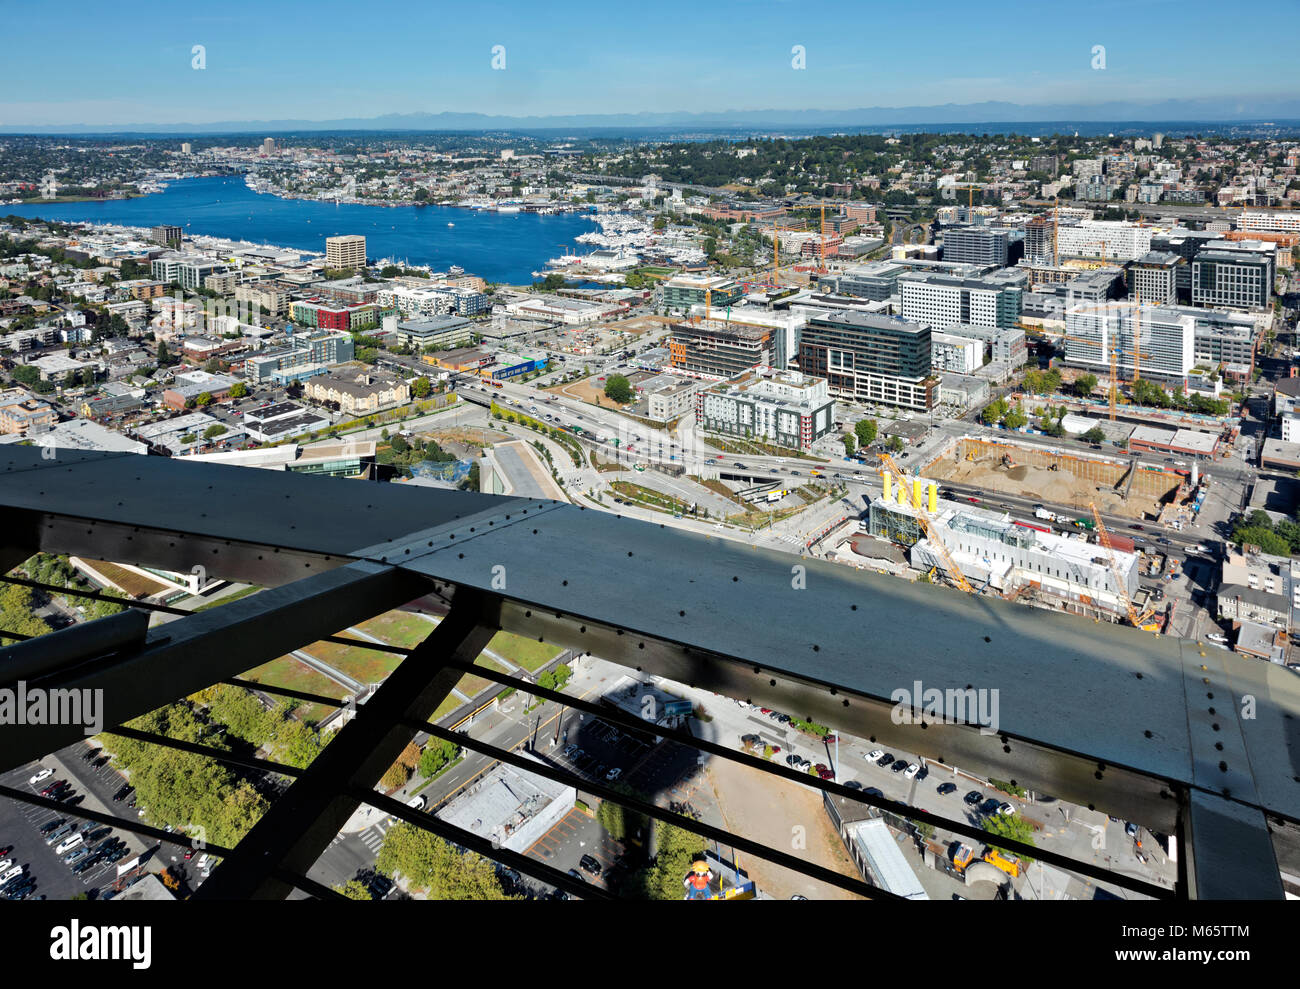 WA13787-00...WASHINGTON - View northeast including Lake Union, the Cascade Mountains from the Observation Deck of the Space Needle, Seattle 2017. Stock Photo